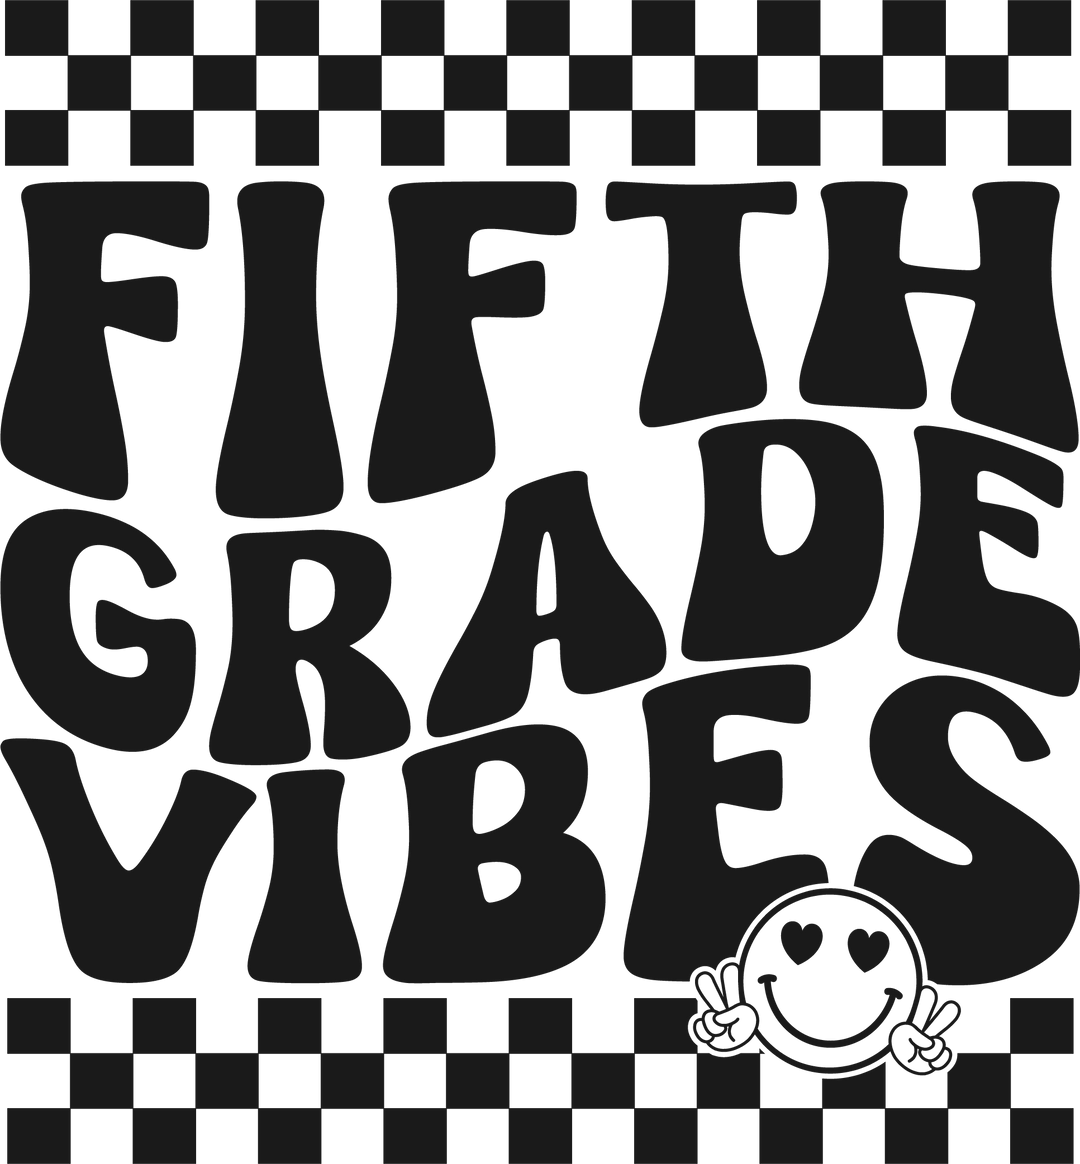 A black and white 5th Grade Vibes Tee for kids, featuring a smiley face graphic. 100% cotton, light fabric, classic fit, tear-away label. Shoulder twill tape, ribbed collar, seamless sides. Dimensions: XS: 16.14W x 20.47L, S: 16.93W x 22.05L, M: 18.11W x 23.62L, L: 18.90W x 25.20L, XL: 20.08W x 26.38L, Sleeve length: XS: 6.34, S: 7.01, M: 7.48, L: 7.99, XL: 8.50.